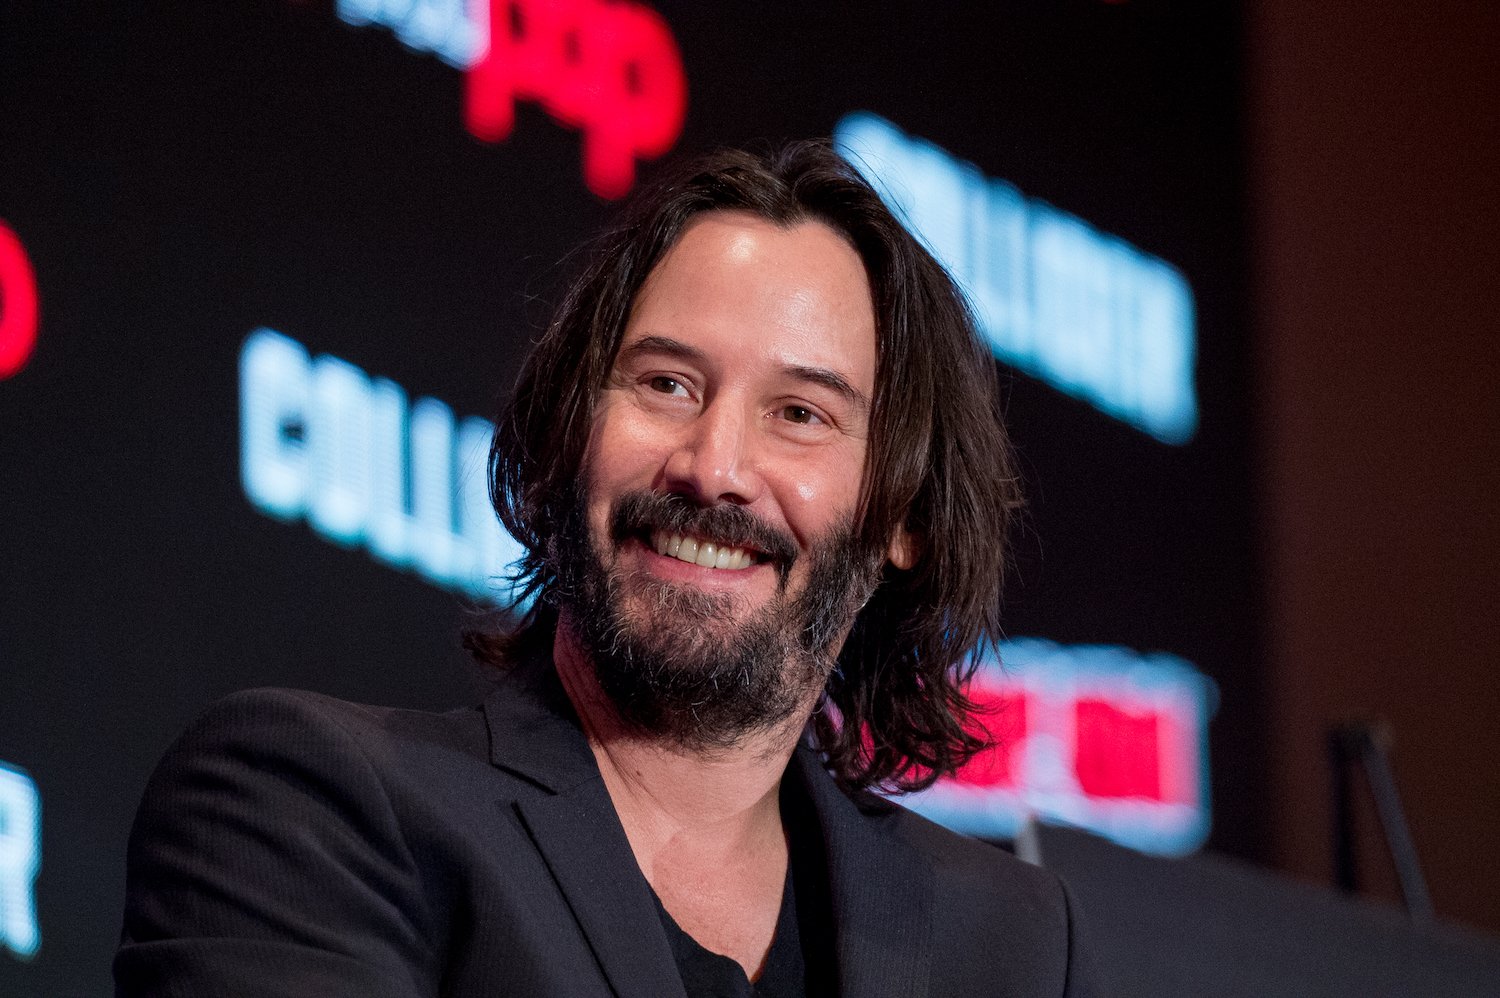 Keanu Reeves discusses "Replicas" during 2017 New York Comic Con